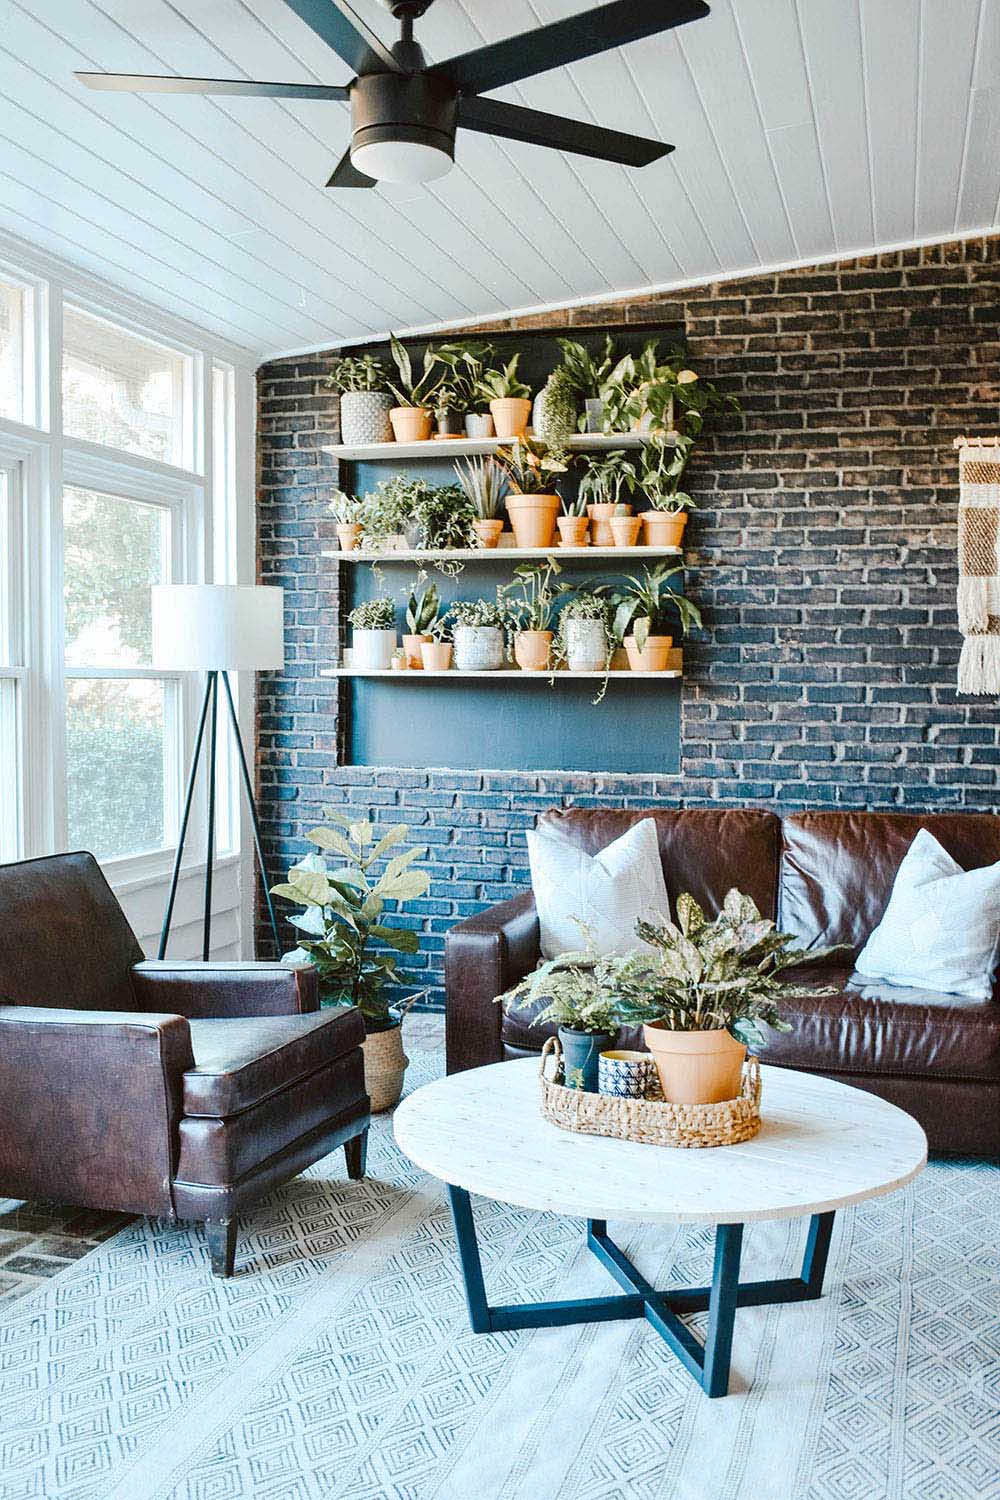 An sunroom with a painted brick wall decorated with shelves of planters.